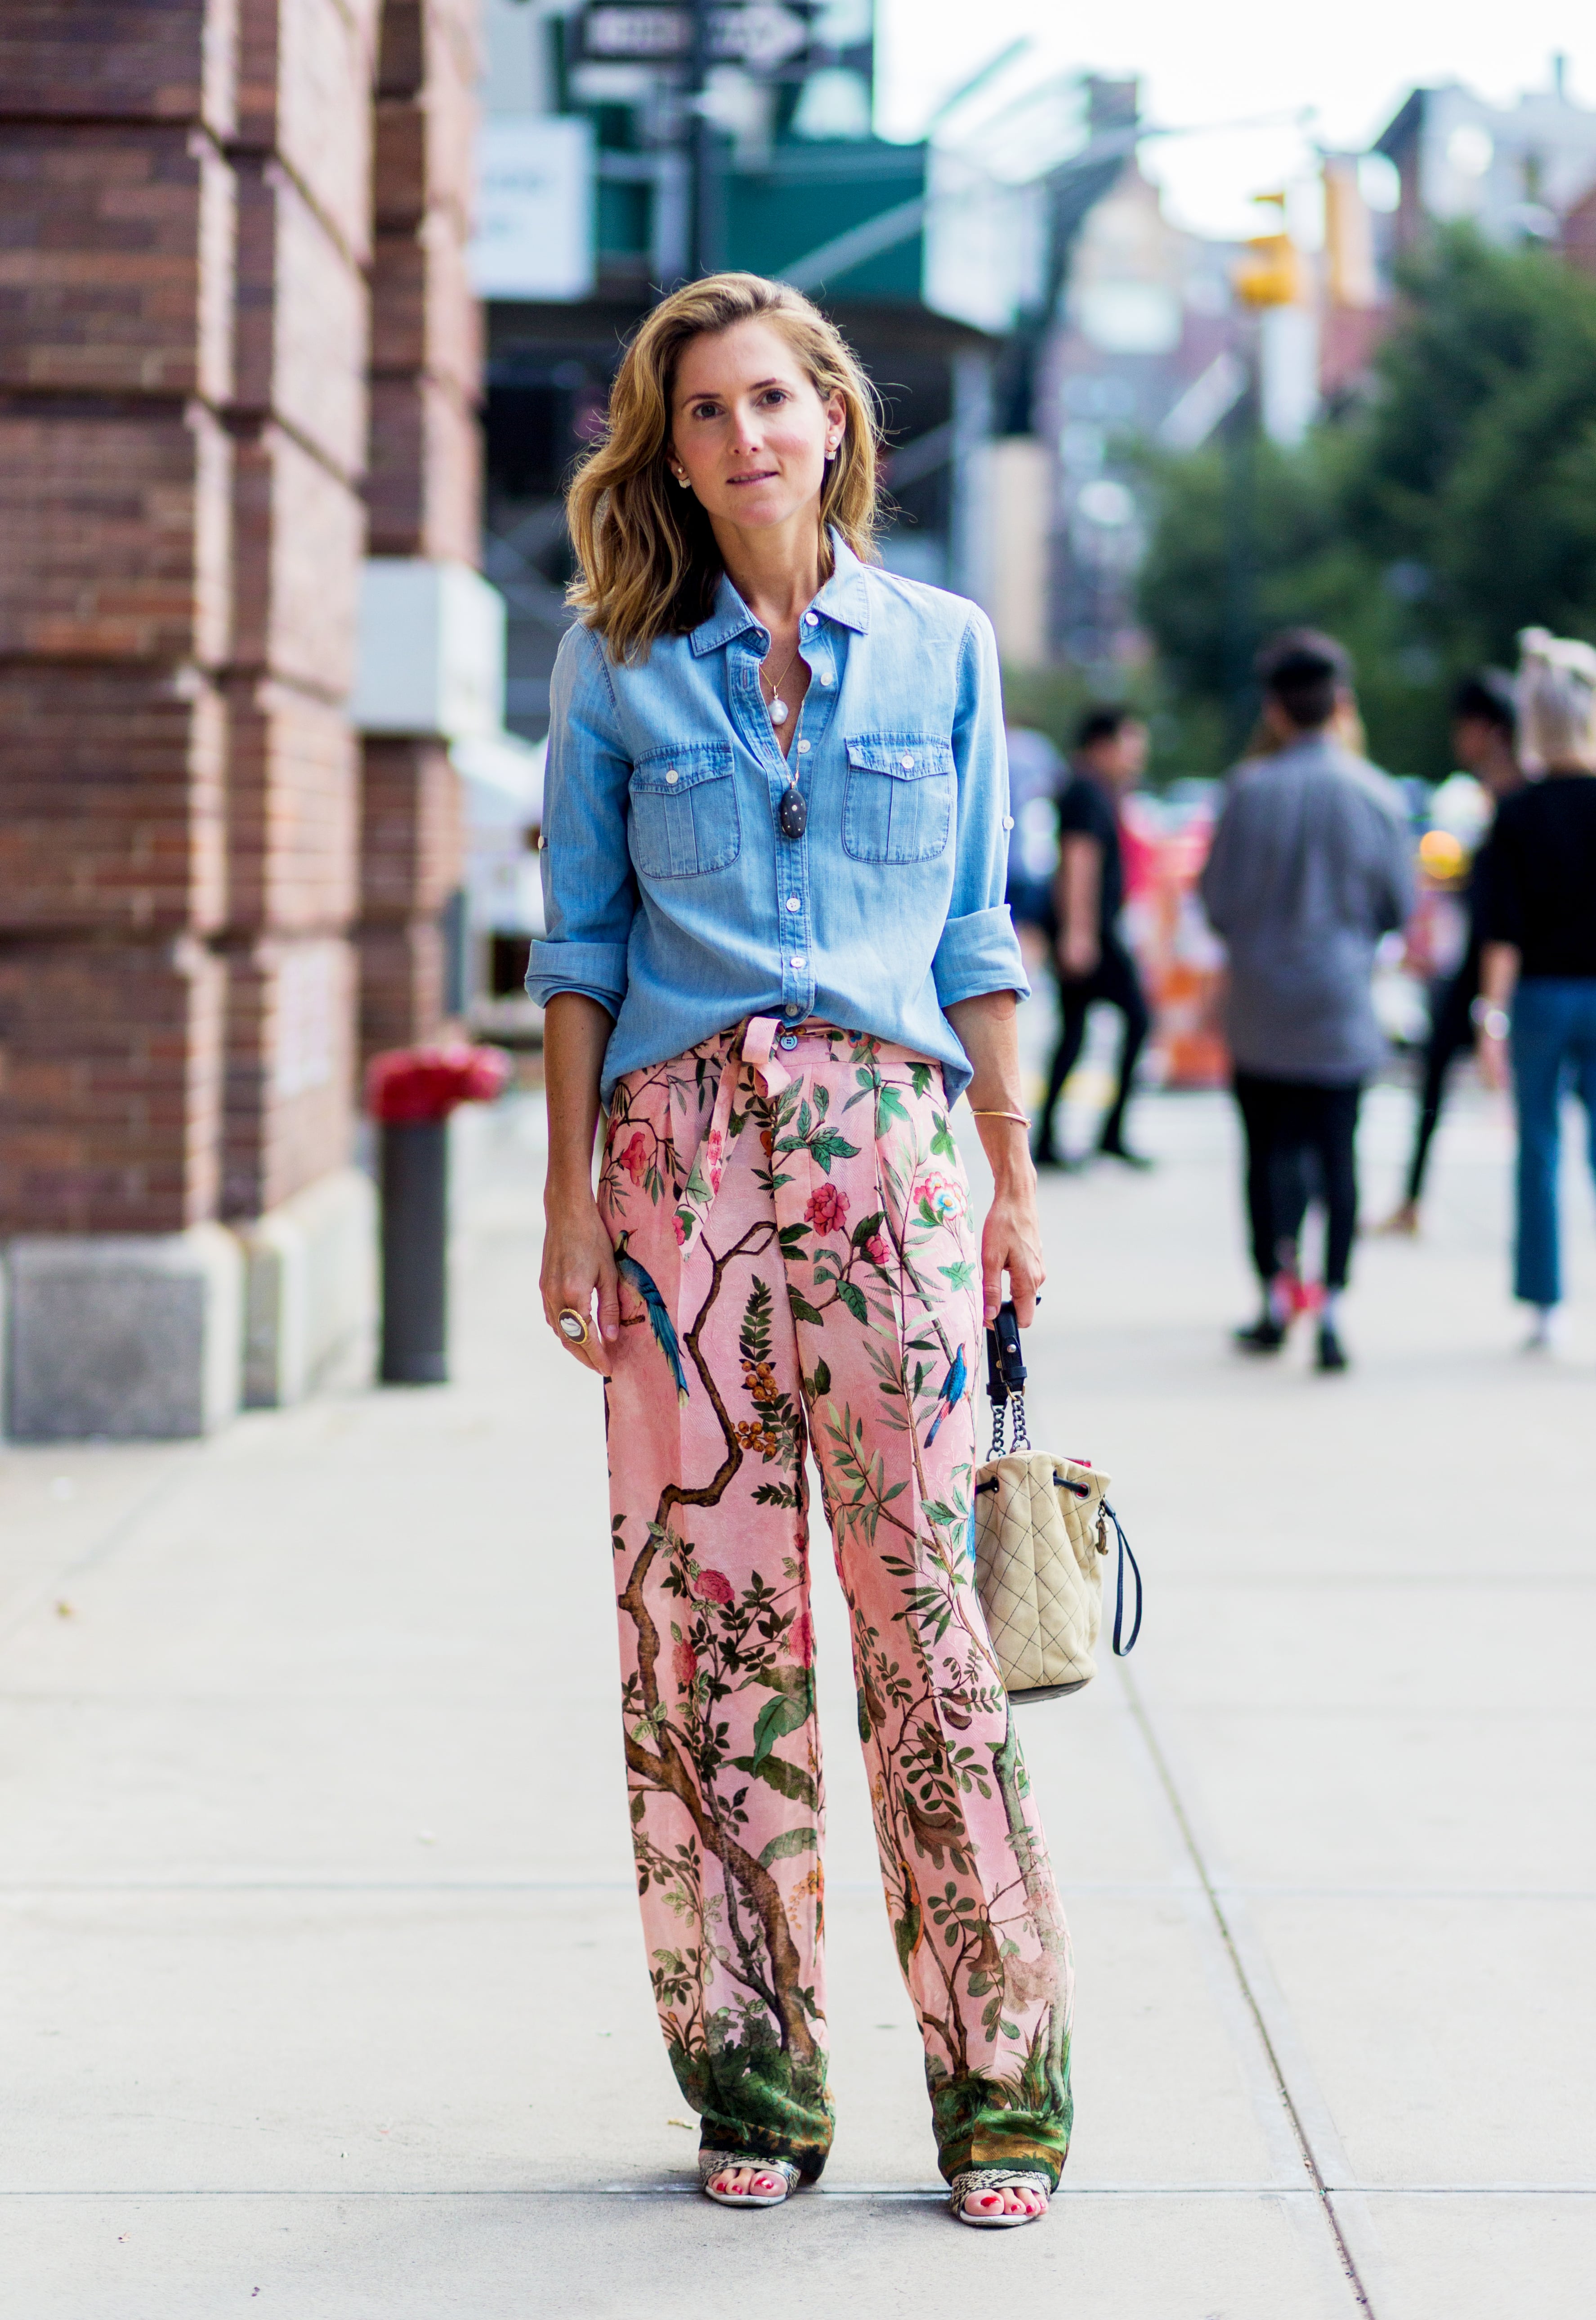 How to Wear Rose Printed Pants